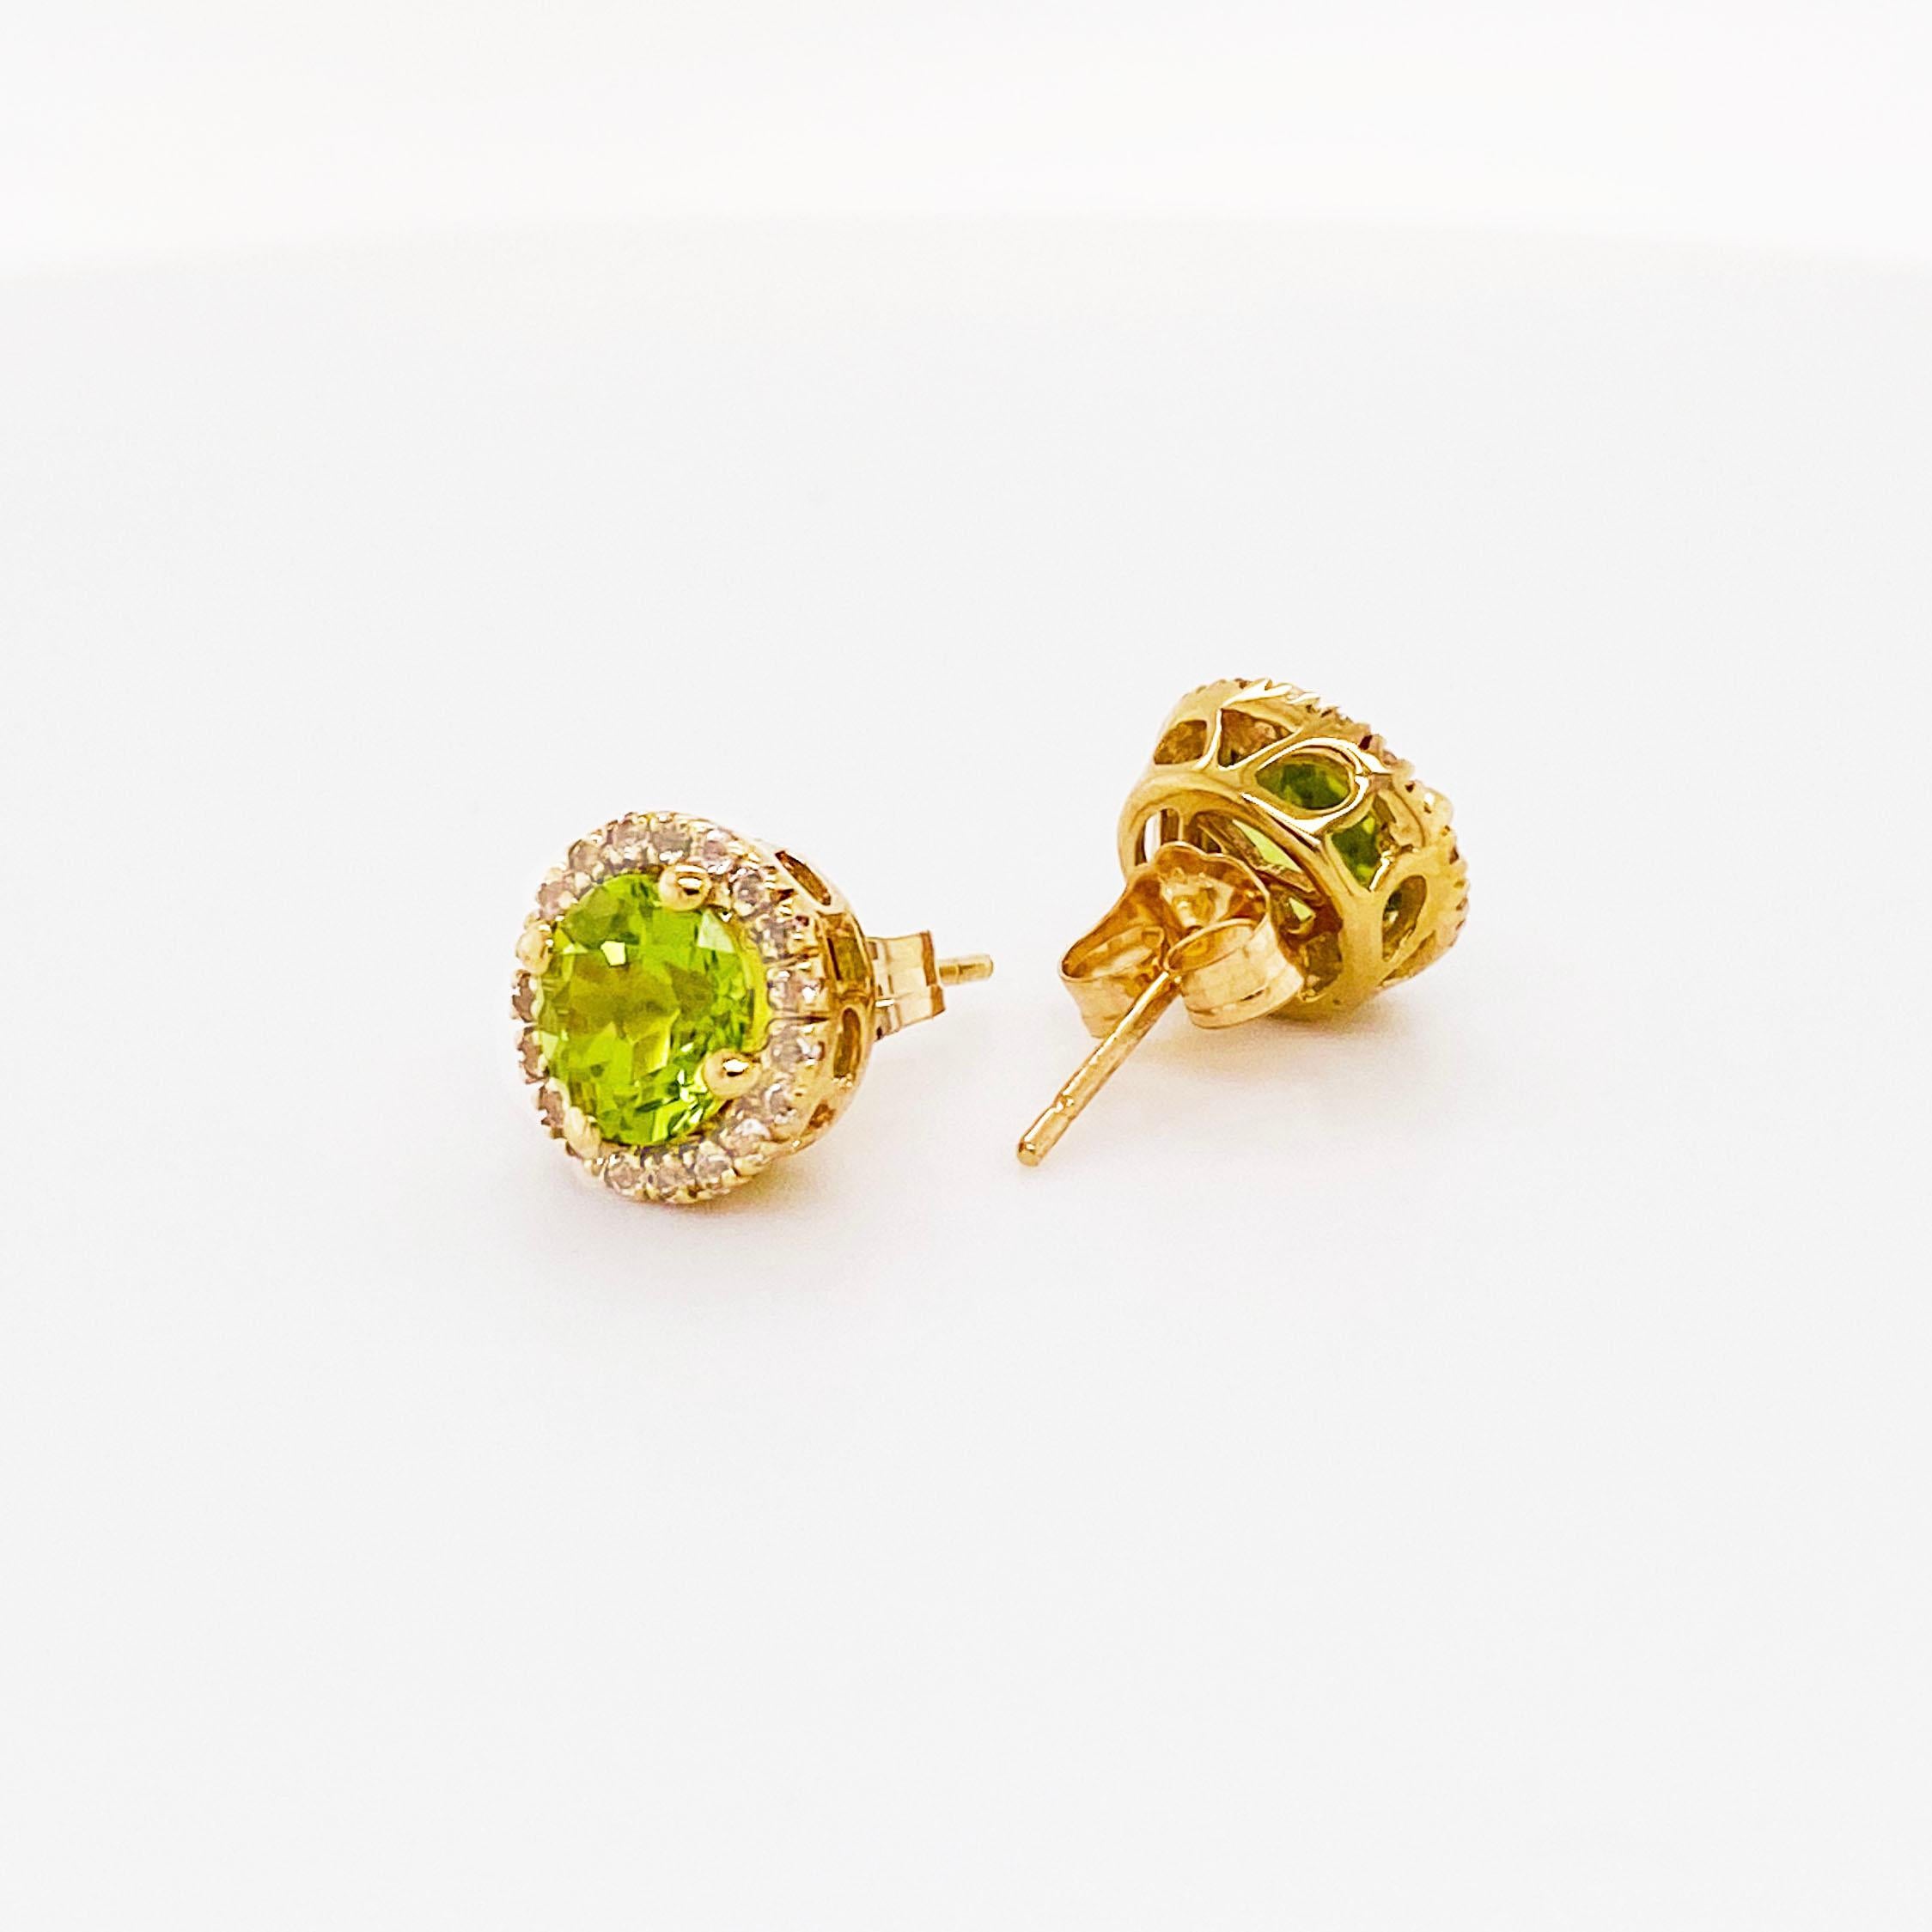 These round white topaz and peridot earrings are lovely on any ear!  The peridots are approximately 2.50 carats total weight and the white topaz gemstones are approximately .50 carats total weight.  The beautiful spring color of the green peridot is